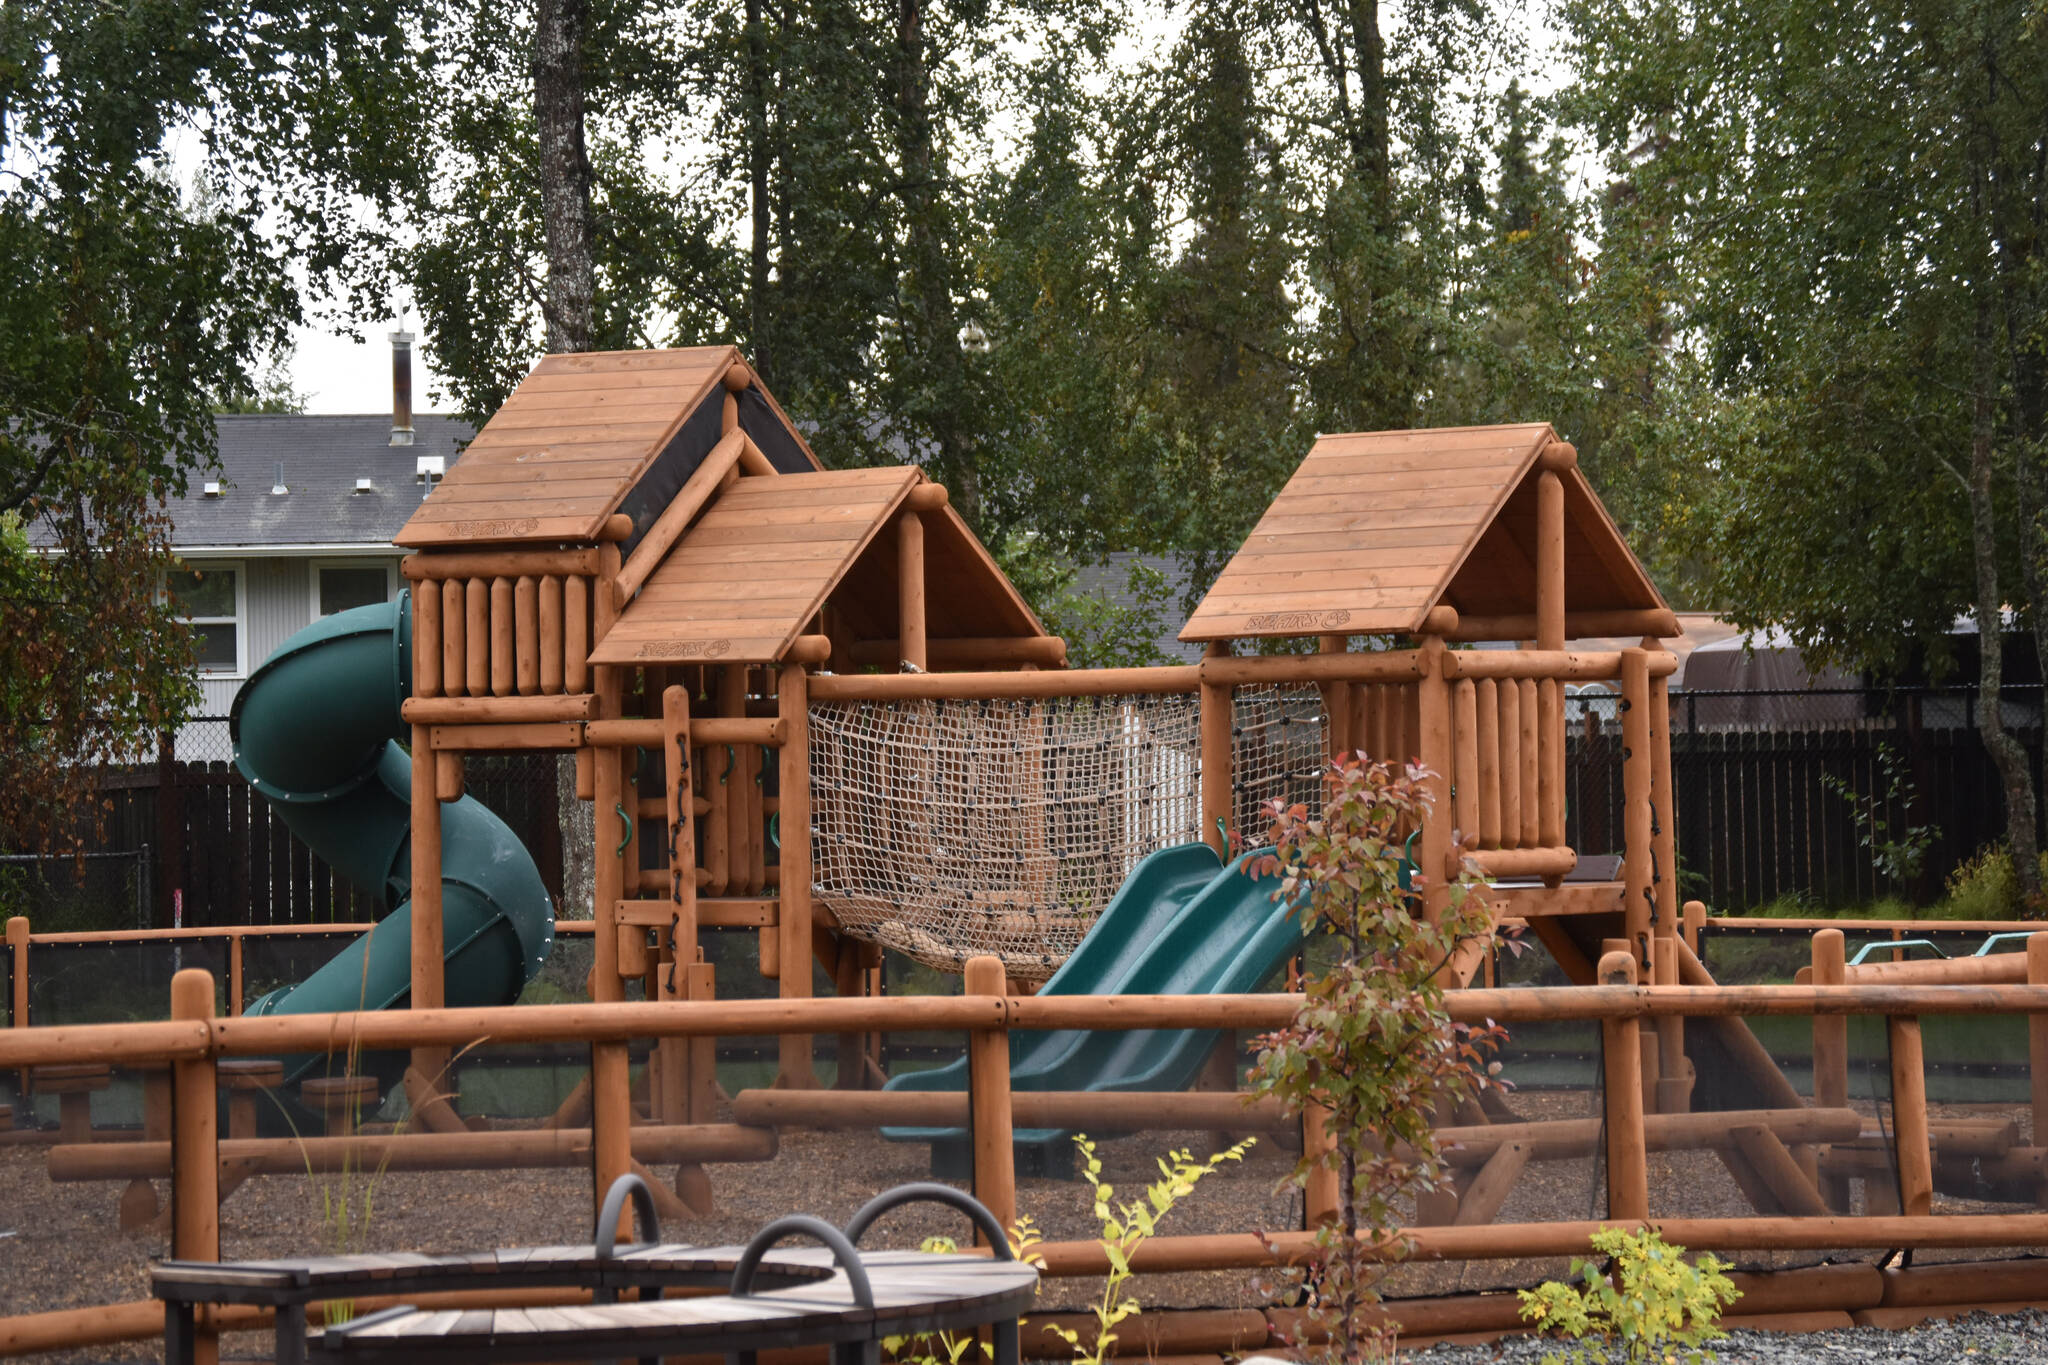 The playground at Kahtnuht’ana Duhdeldiht Campus features a variety of structures and areas for different students and age groups on Thursday, Sept. 1, 2022, in Kenai, Alaska. (Jake Dye/Peninsula Clarion)